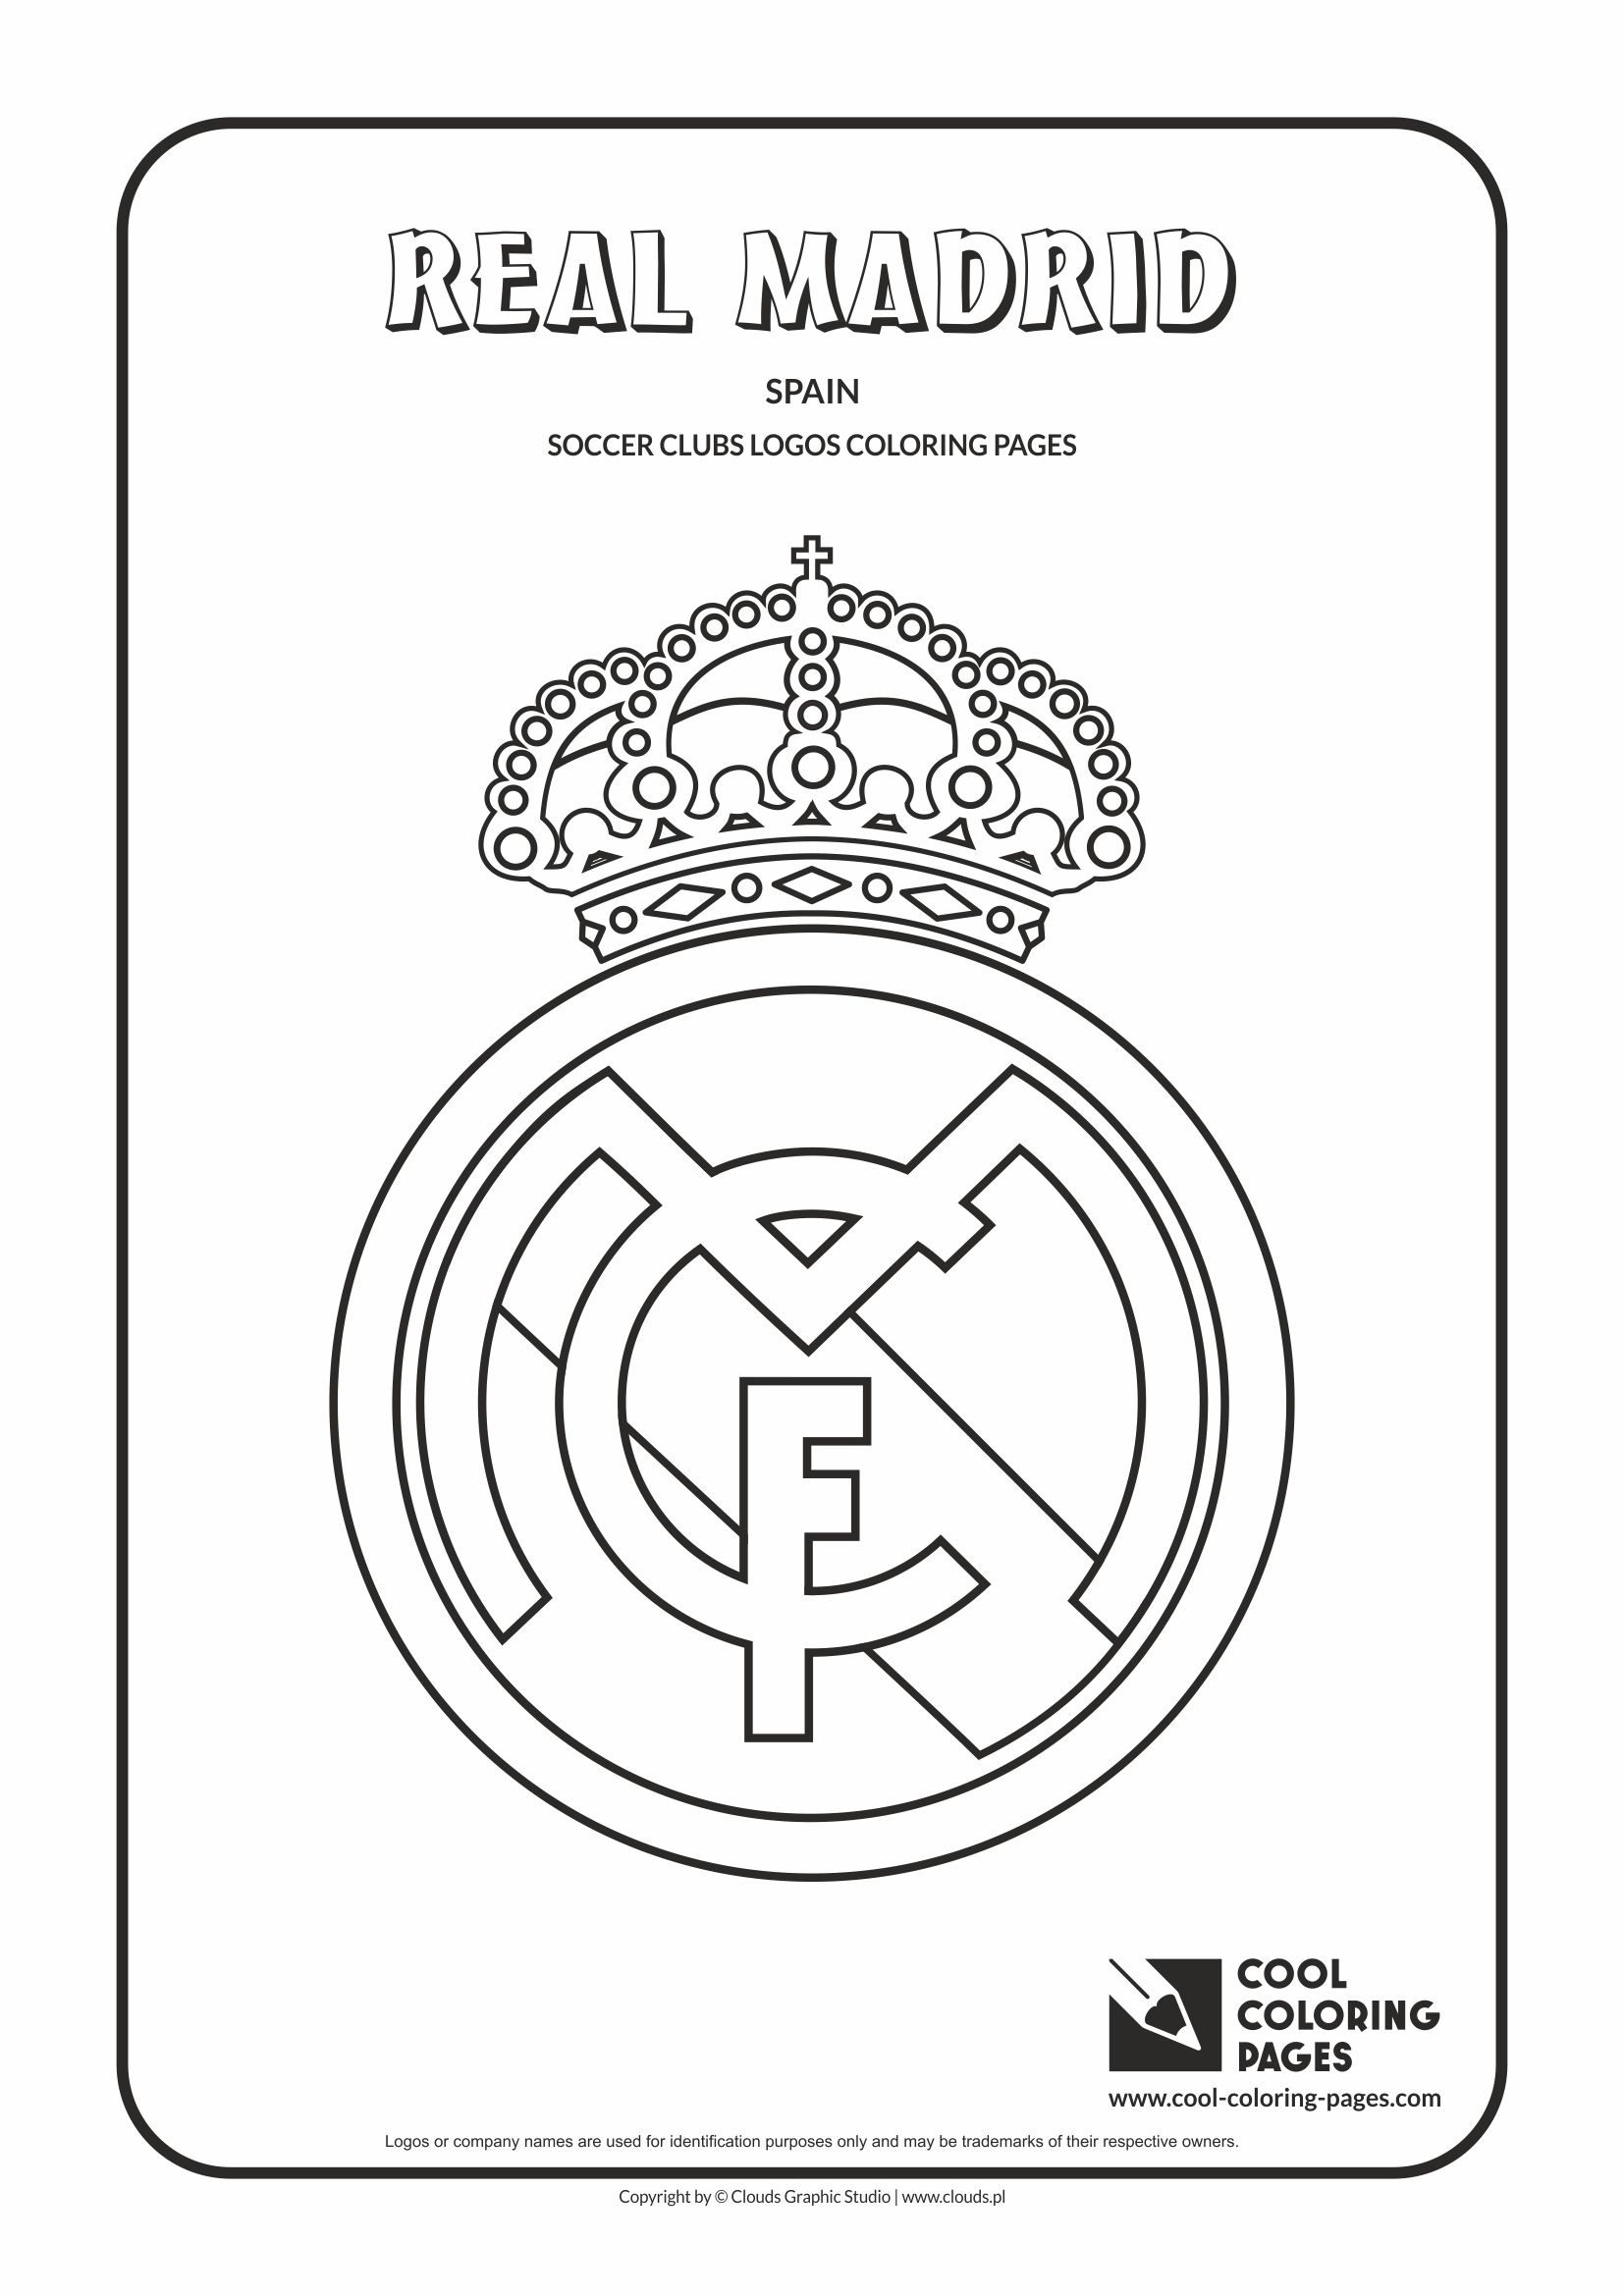 Cool coloring pages real madrid logo coloring page